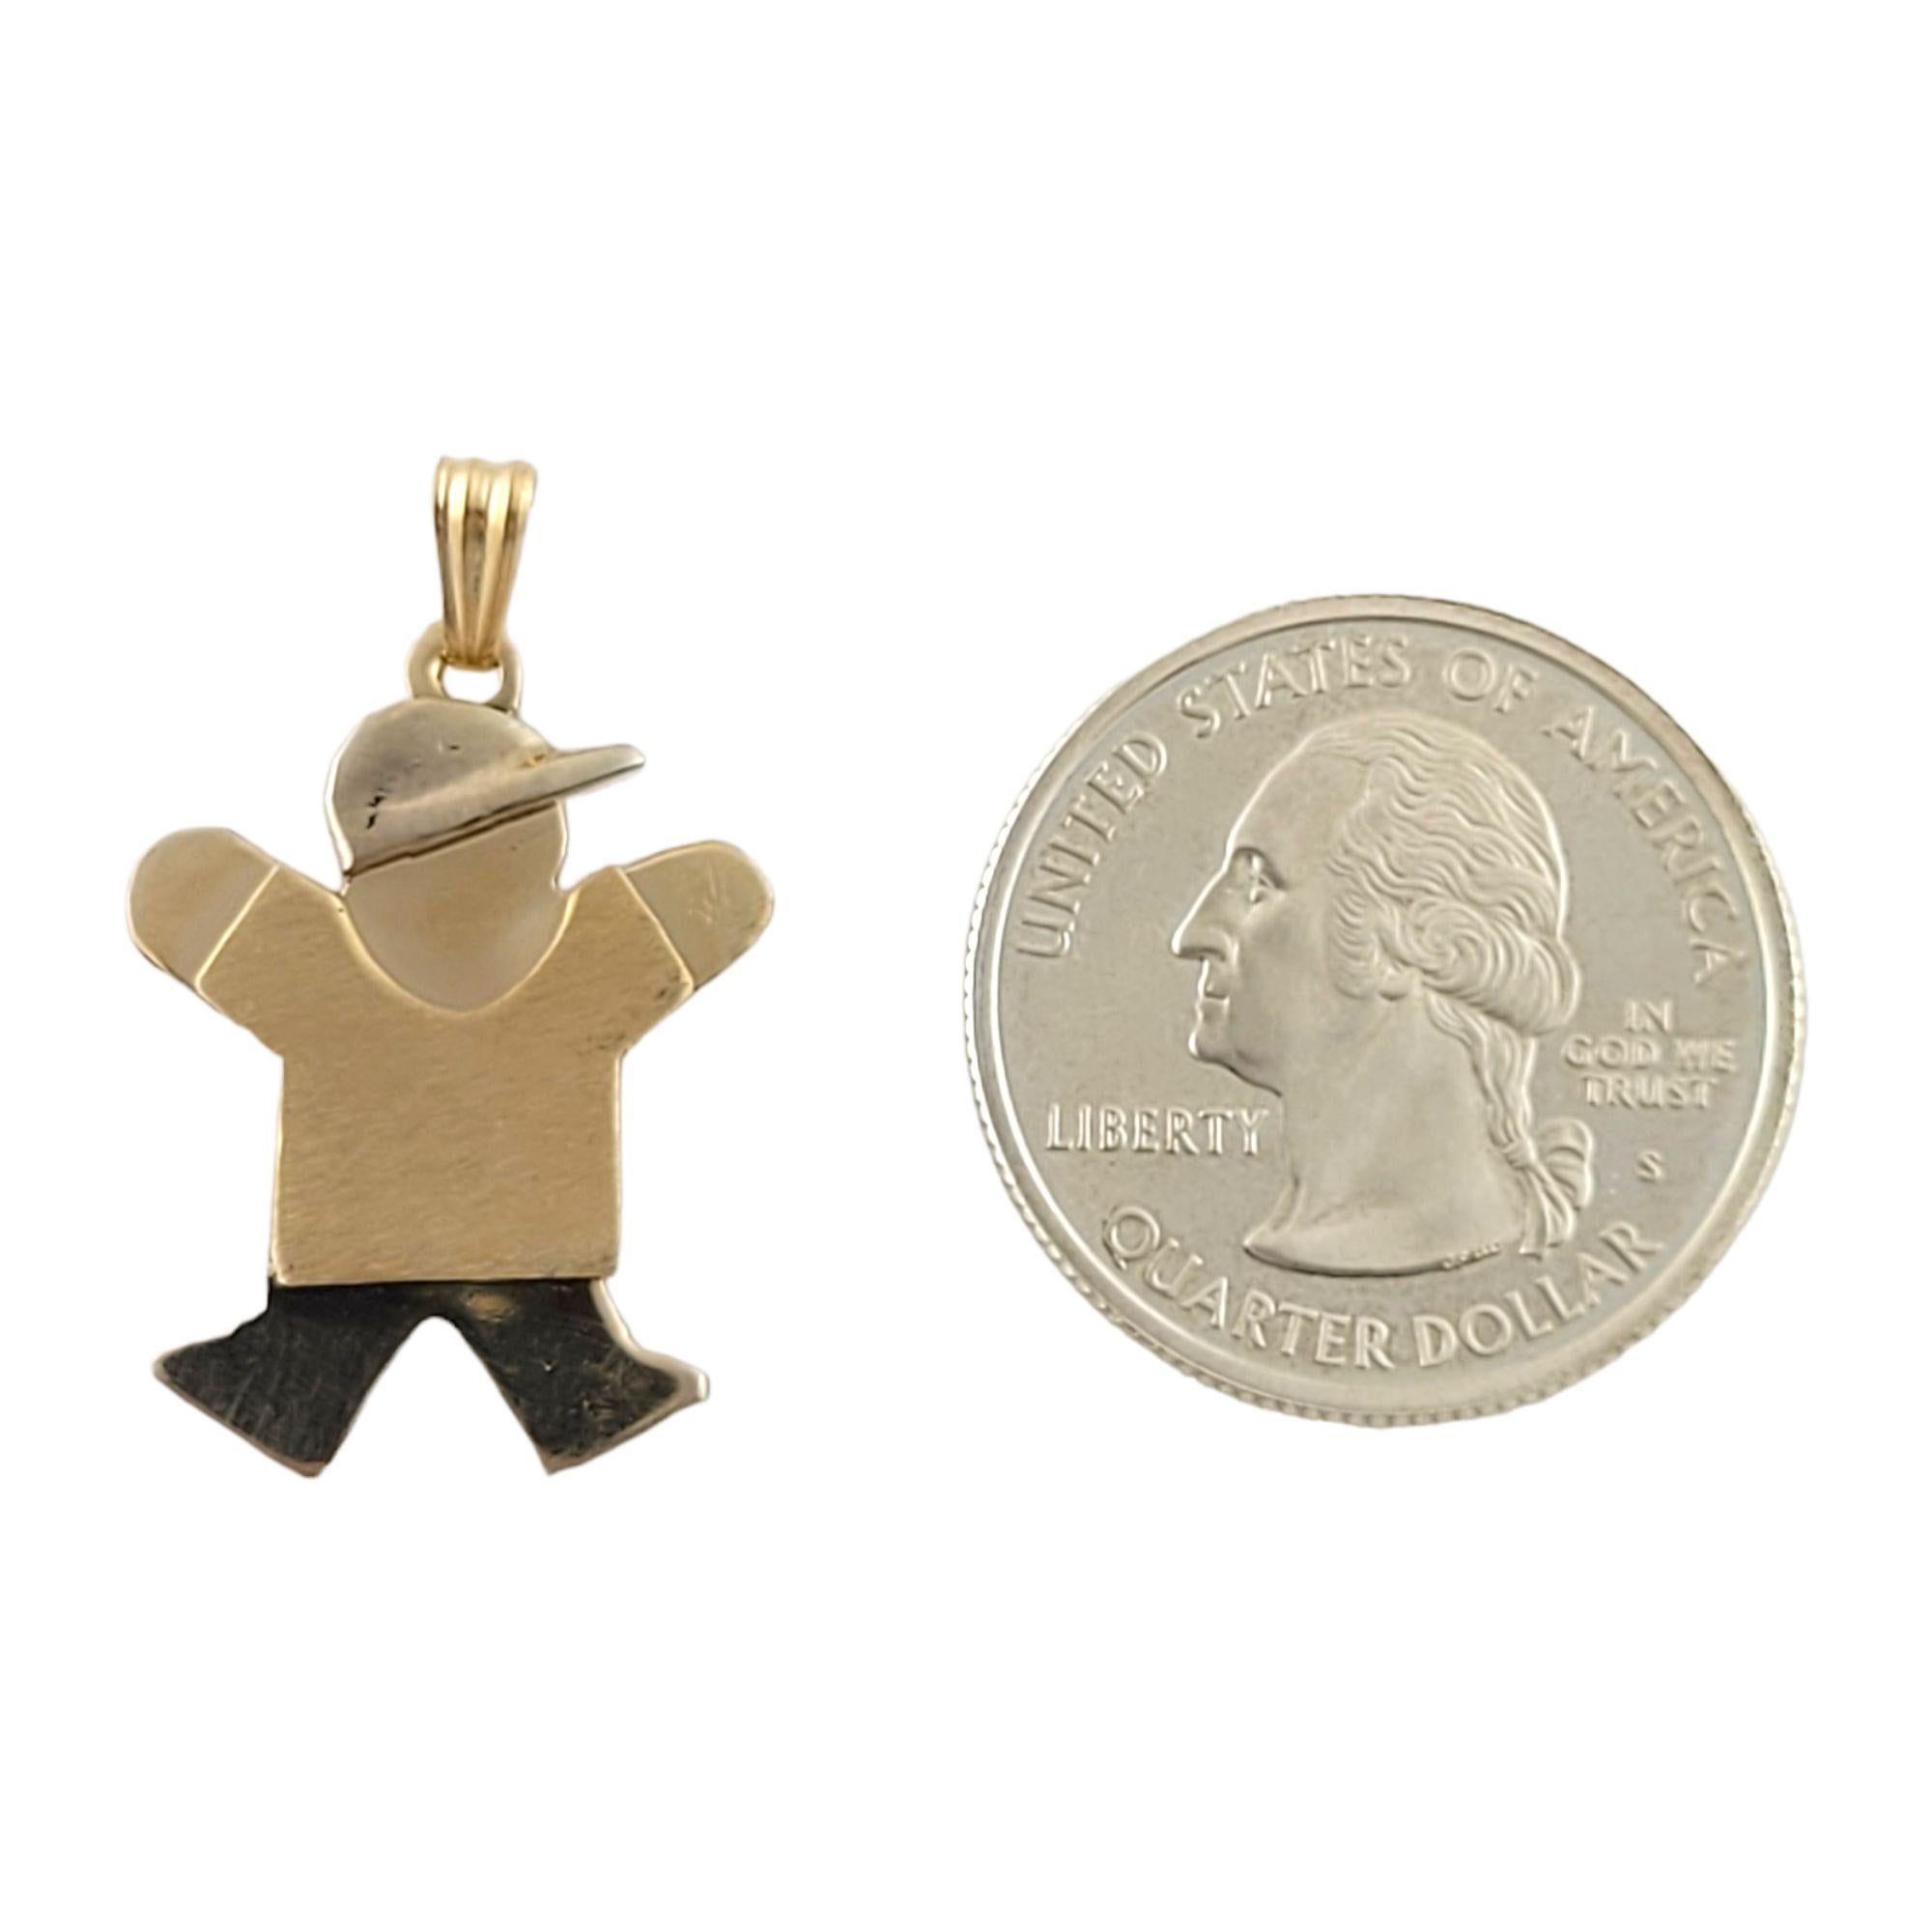 Vintage 14K Yellow Gold Little Boy Charm

This adorable little boy chain is perfect for any necklace!

Size: 18mm x 30mm x 1.5mm

Weight: 3.4gr / 2.1dwt

Hallmark: 14K

Very good condition, professionally polished.

*Chain not included*

Will come